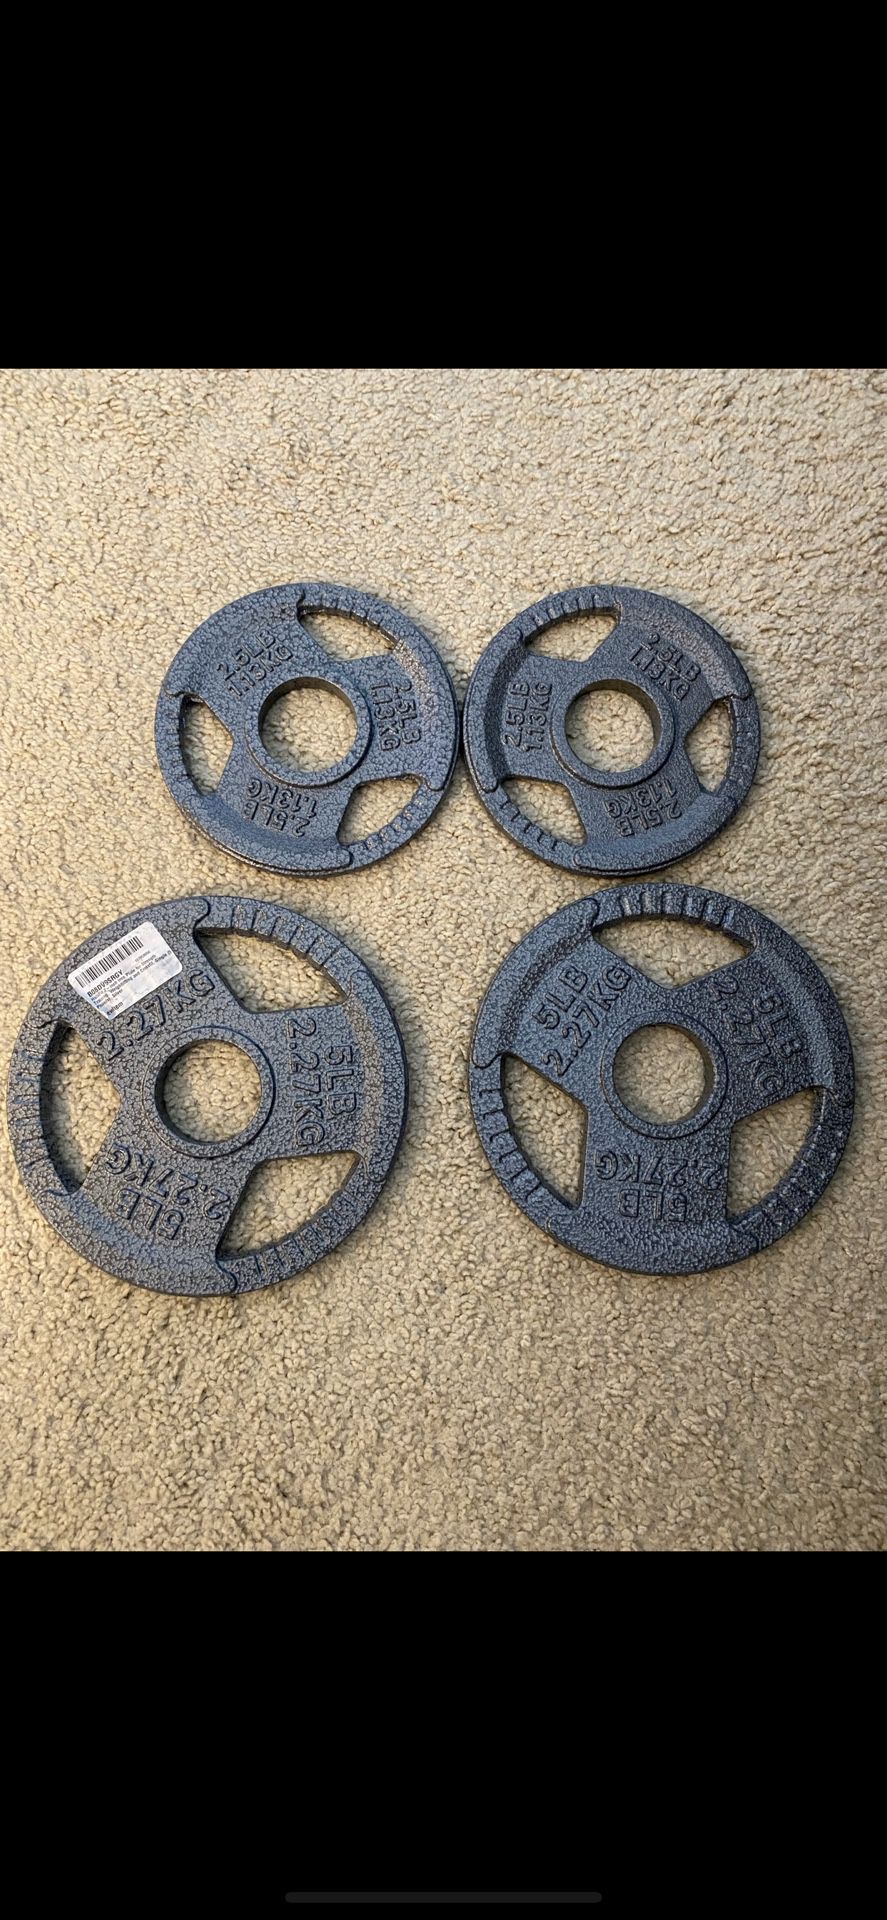 2 Inch Iron Barbell Plate (2*2.5 Lb + 2*5lb)